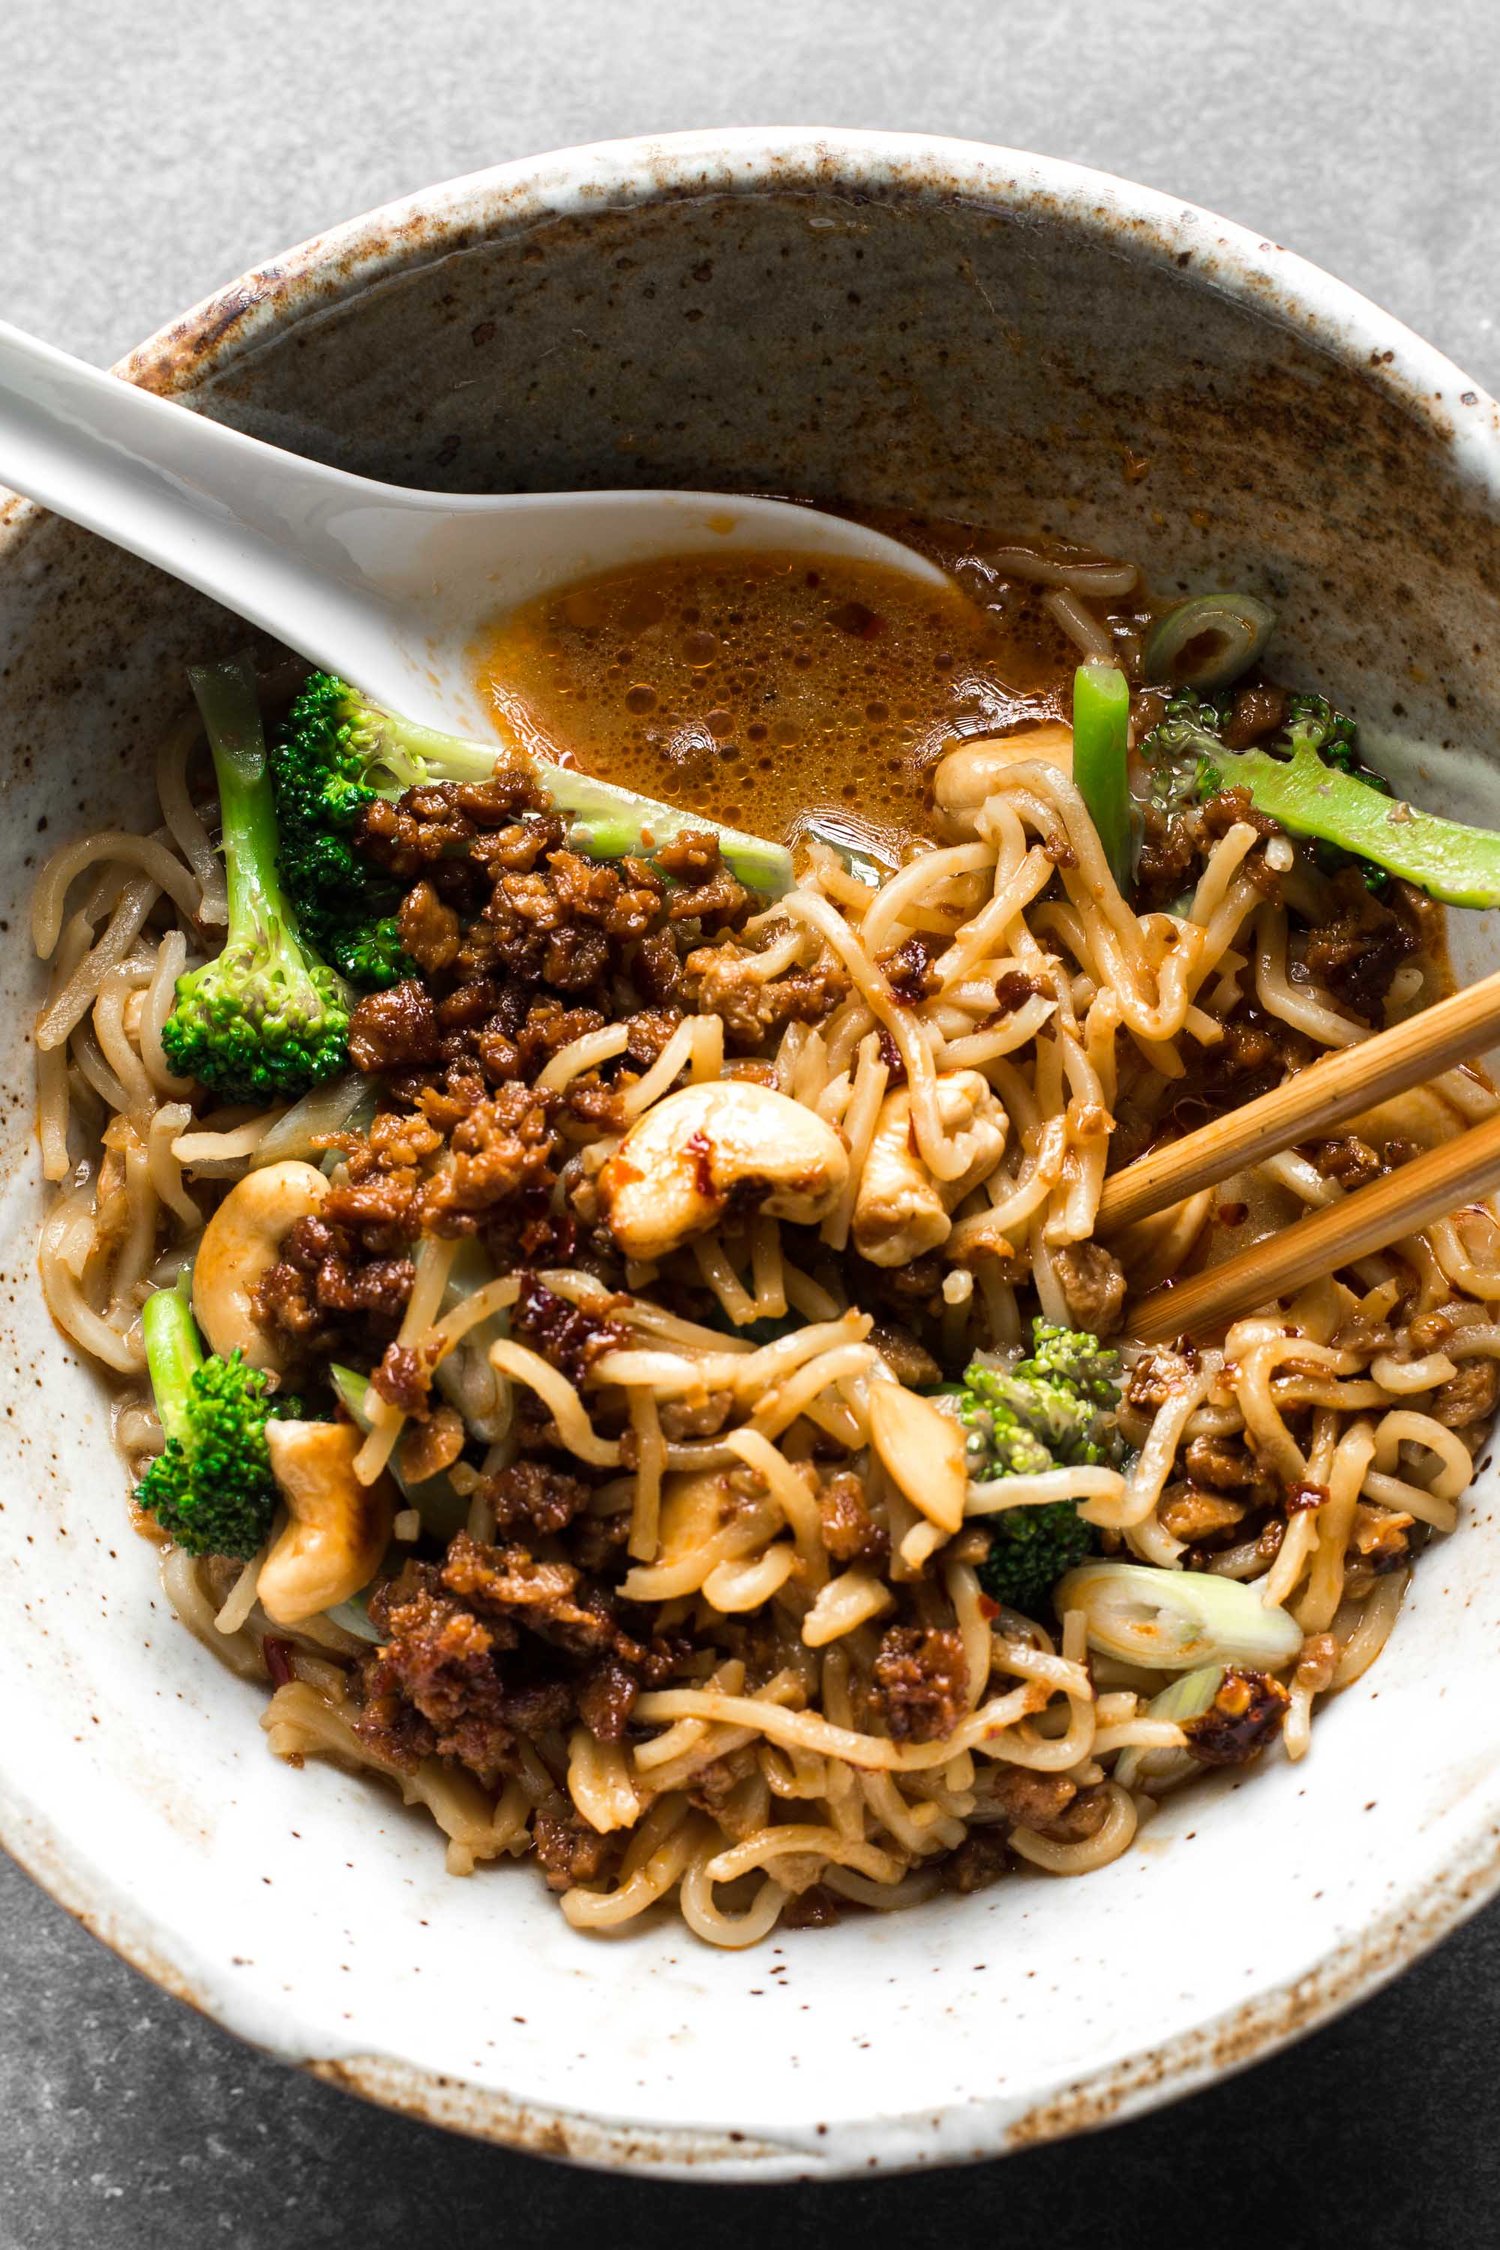 Foodies across the globe are taking part in the 'fire noodle